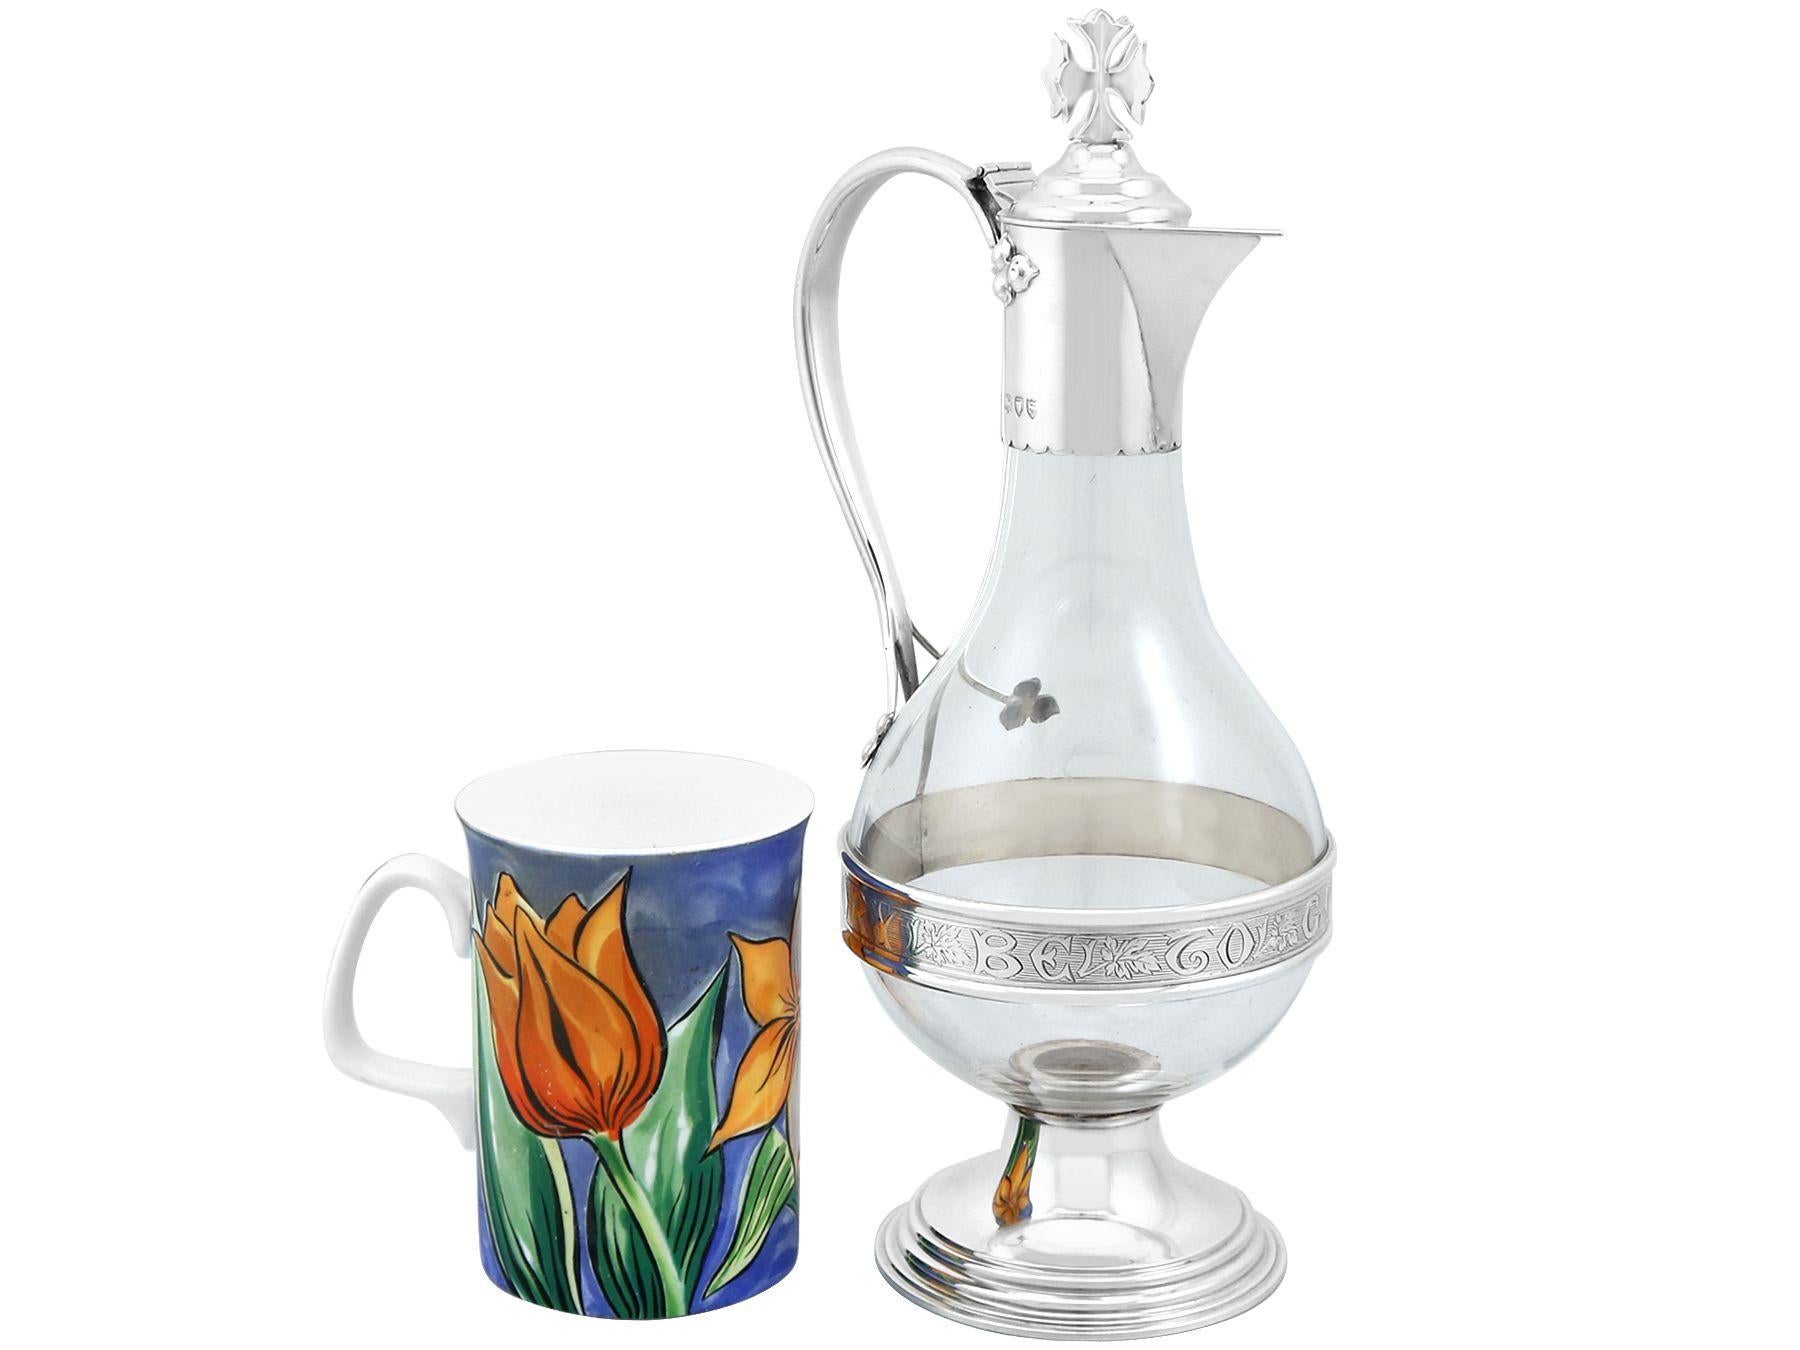 An exceptional, fine and impressive antique Victorian glass and English sterling silver mounted communion wine jug; an addition to our wine and drink related silverware collection

This exceptional antique Victorian sterling silver and glass wine